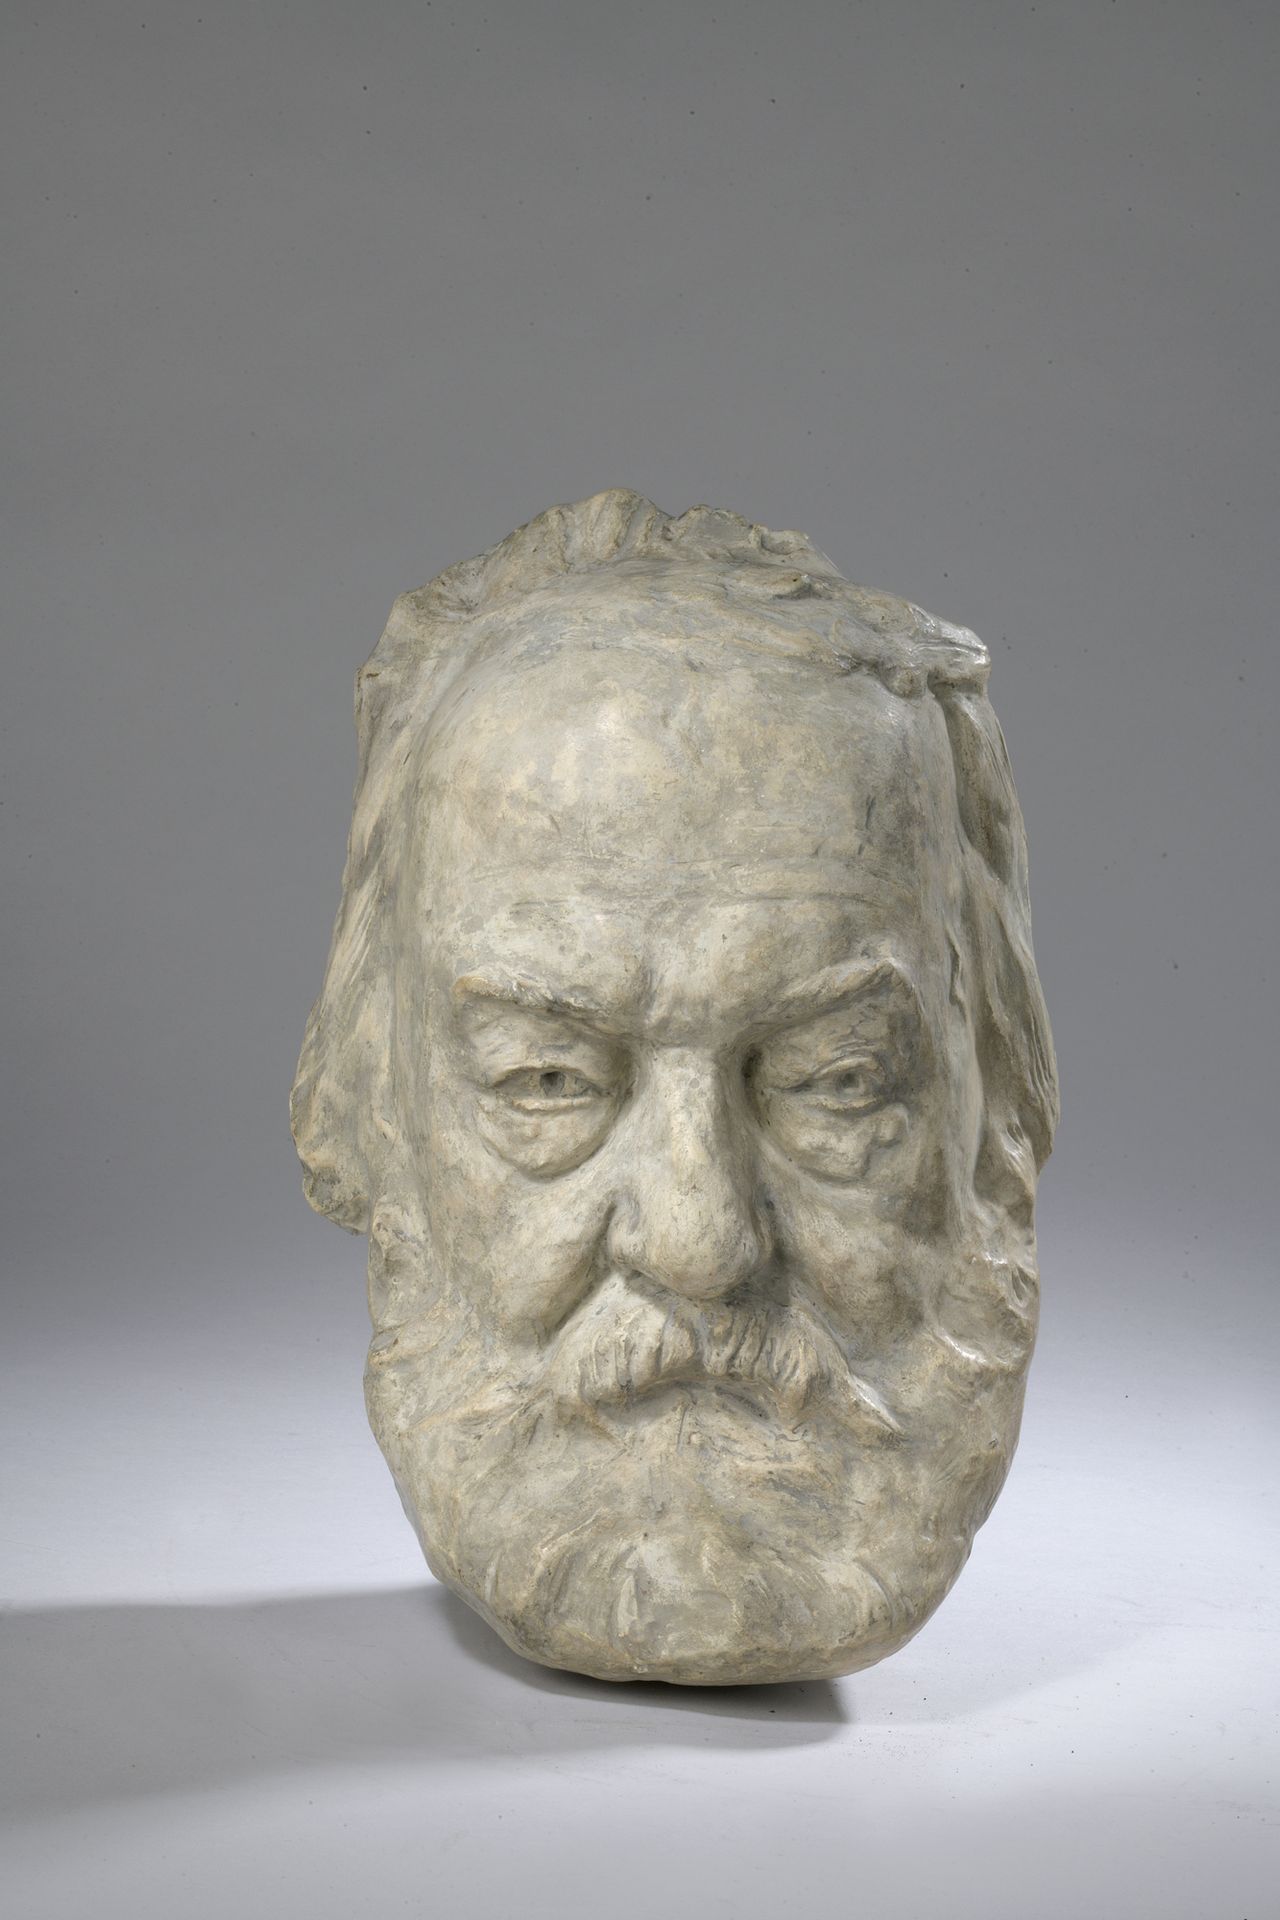 Null Jean-Georges ACHARD (1871-1934)

Mask of Victor Hugo

Proof in plaster. 

S&hellip;